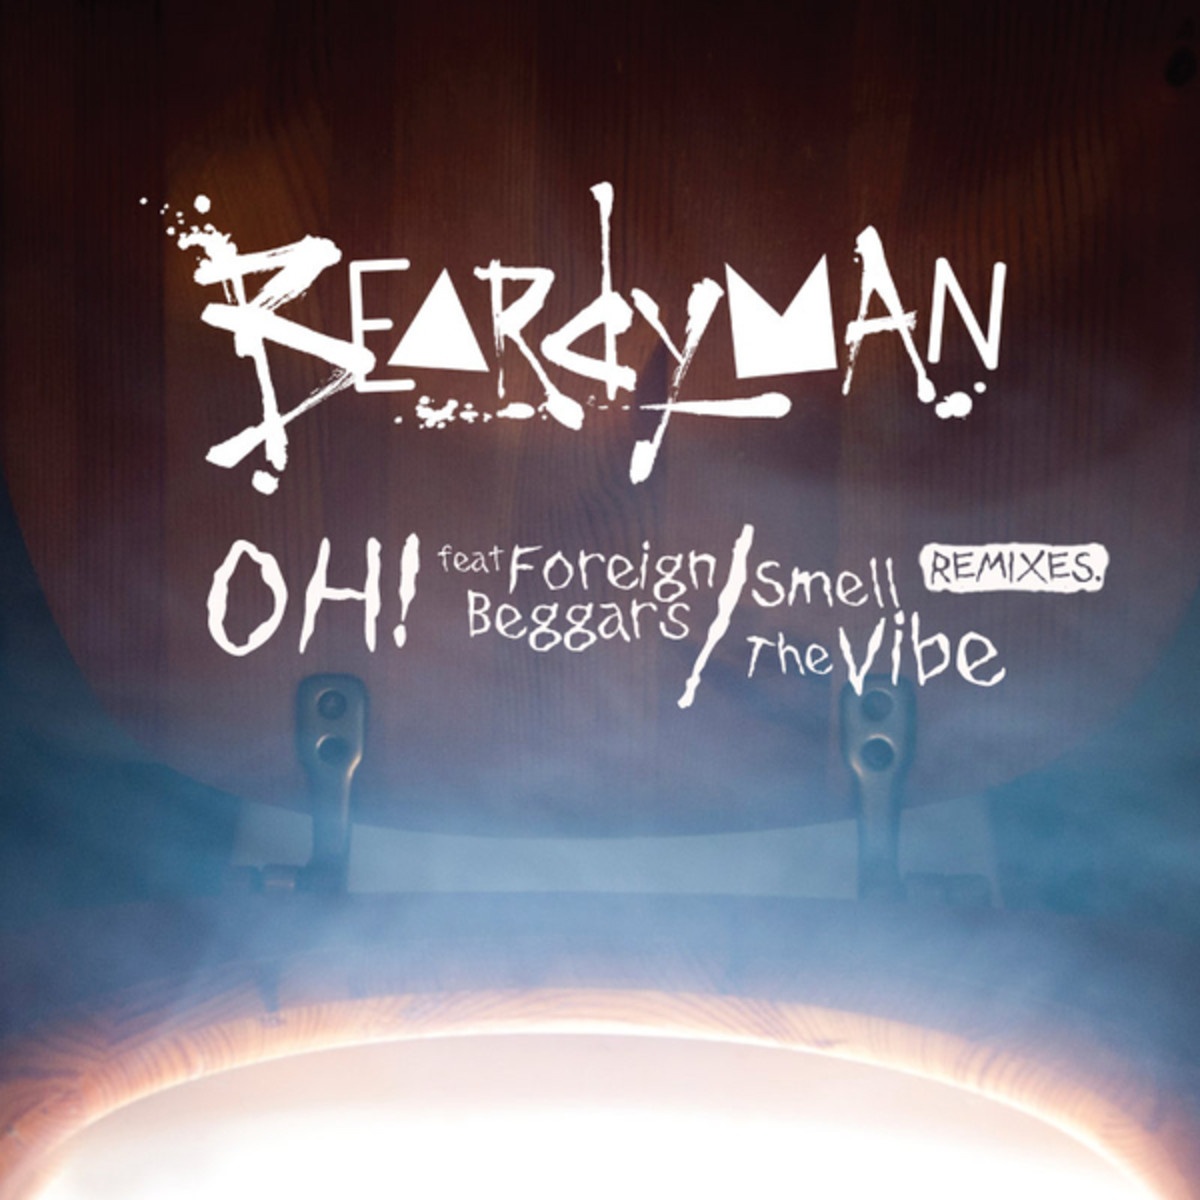 Oh!    LowFro Remix  by Beardyman Foreign Beggars